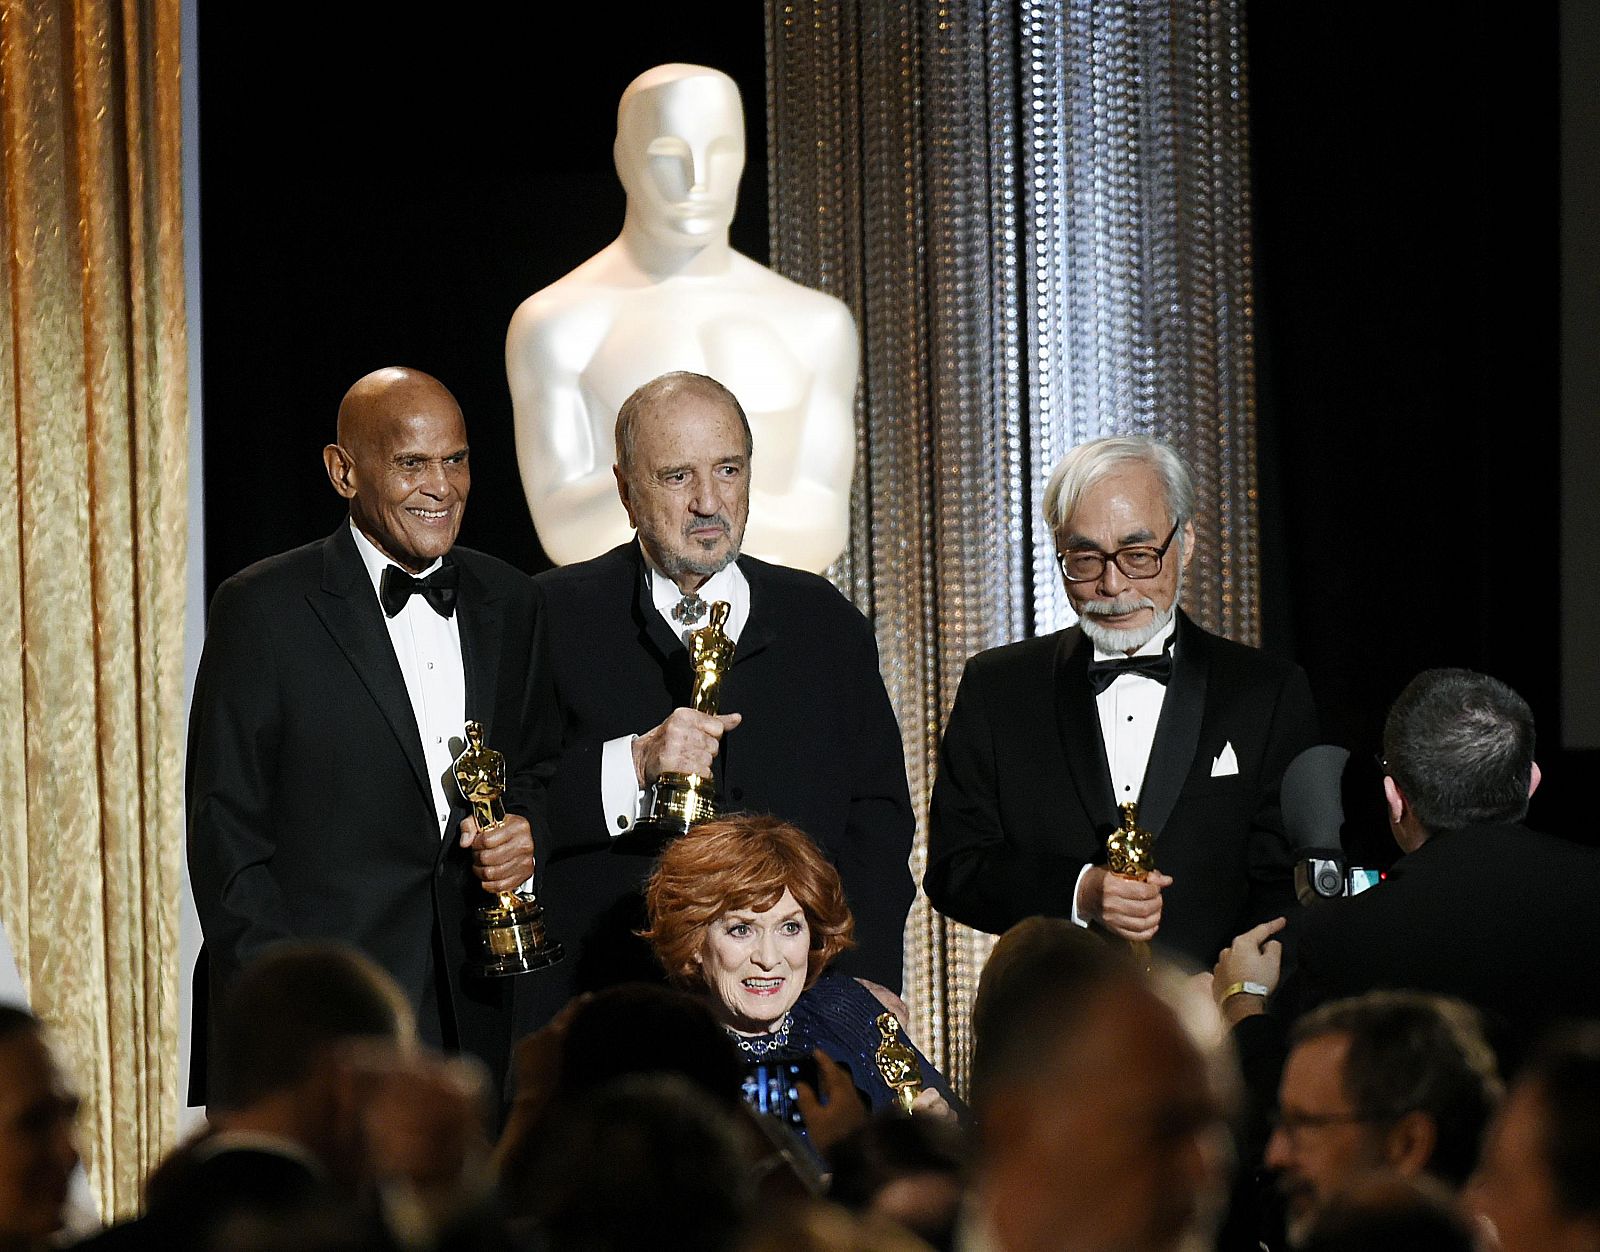 Singer and social activist Belafonte, holding the Jean Hersholt Humanitarian Award, screenwriter Carriere, actress O'Hara and Japanese film director and animator Miyazaki pose onstage at the Academy of Mot